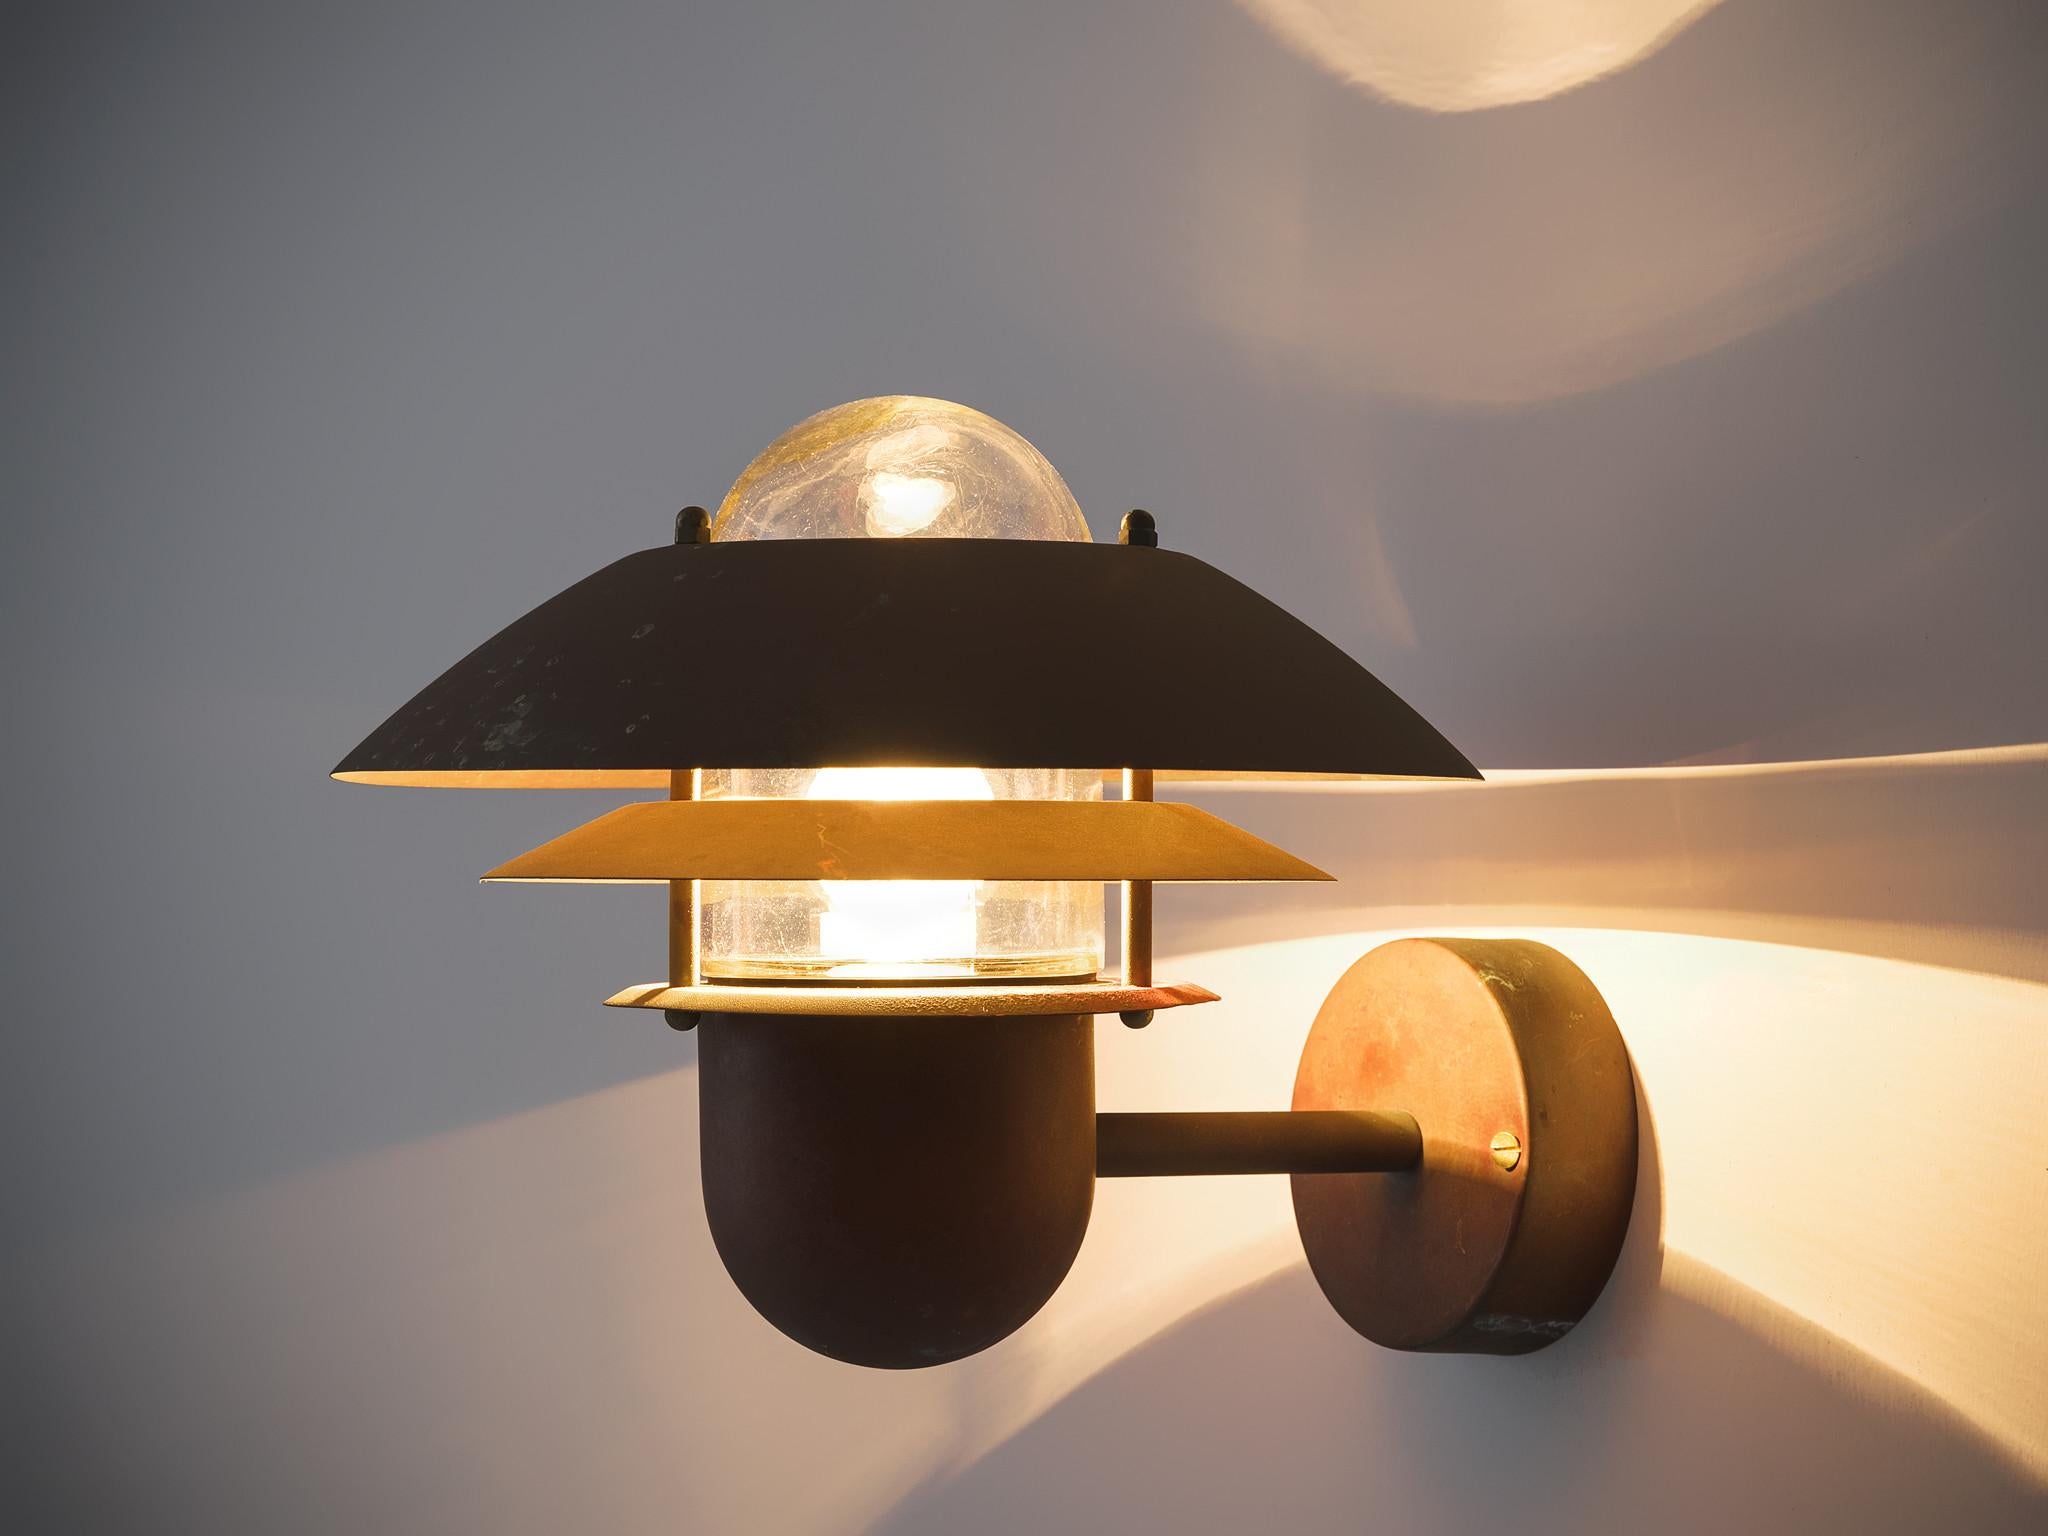 Wall light, copper, Denmark, 1930s

Elegant wall light executed in copper. The three layered shade has a reflective system, thus directing the majority of the light downwards. Thanks to the beautiful aesthetic of the lamp and the warm light created